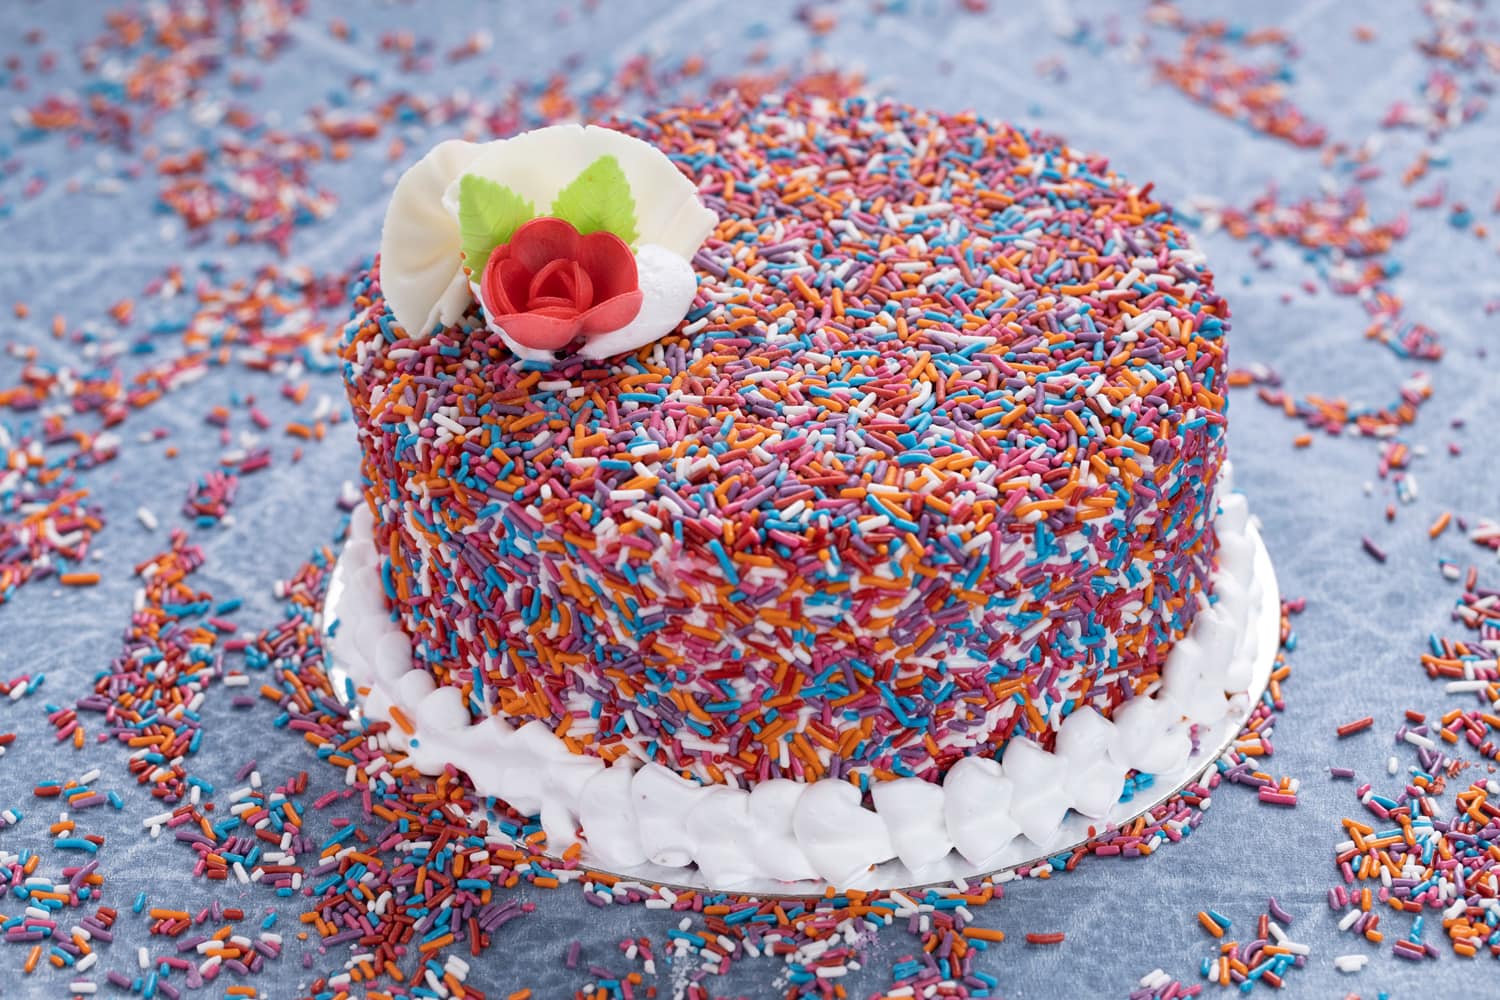 Colorful Rainbow marble cake with sprinkles over a white background